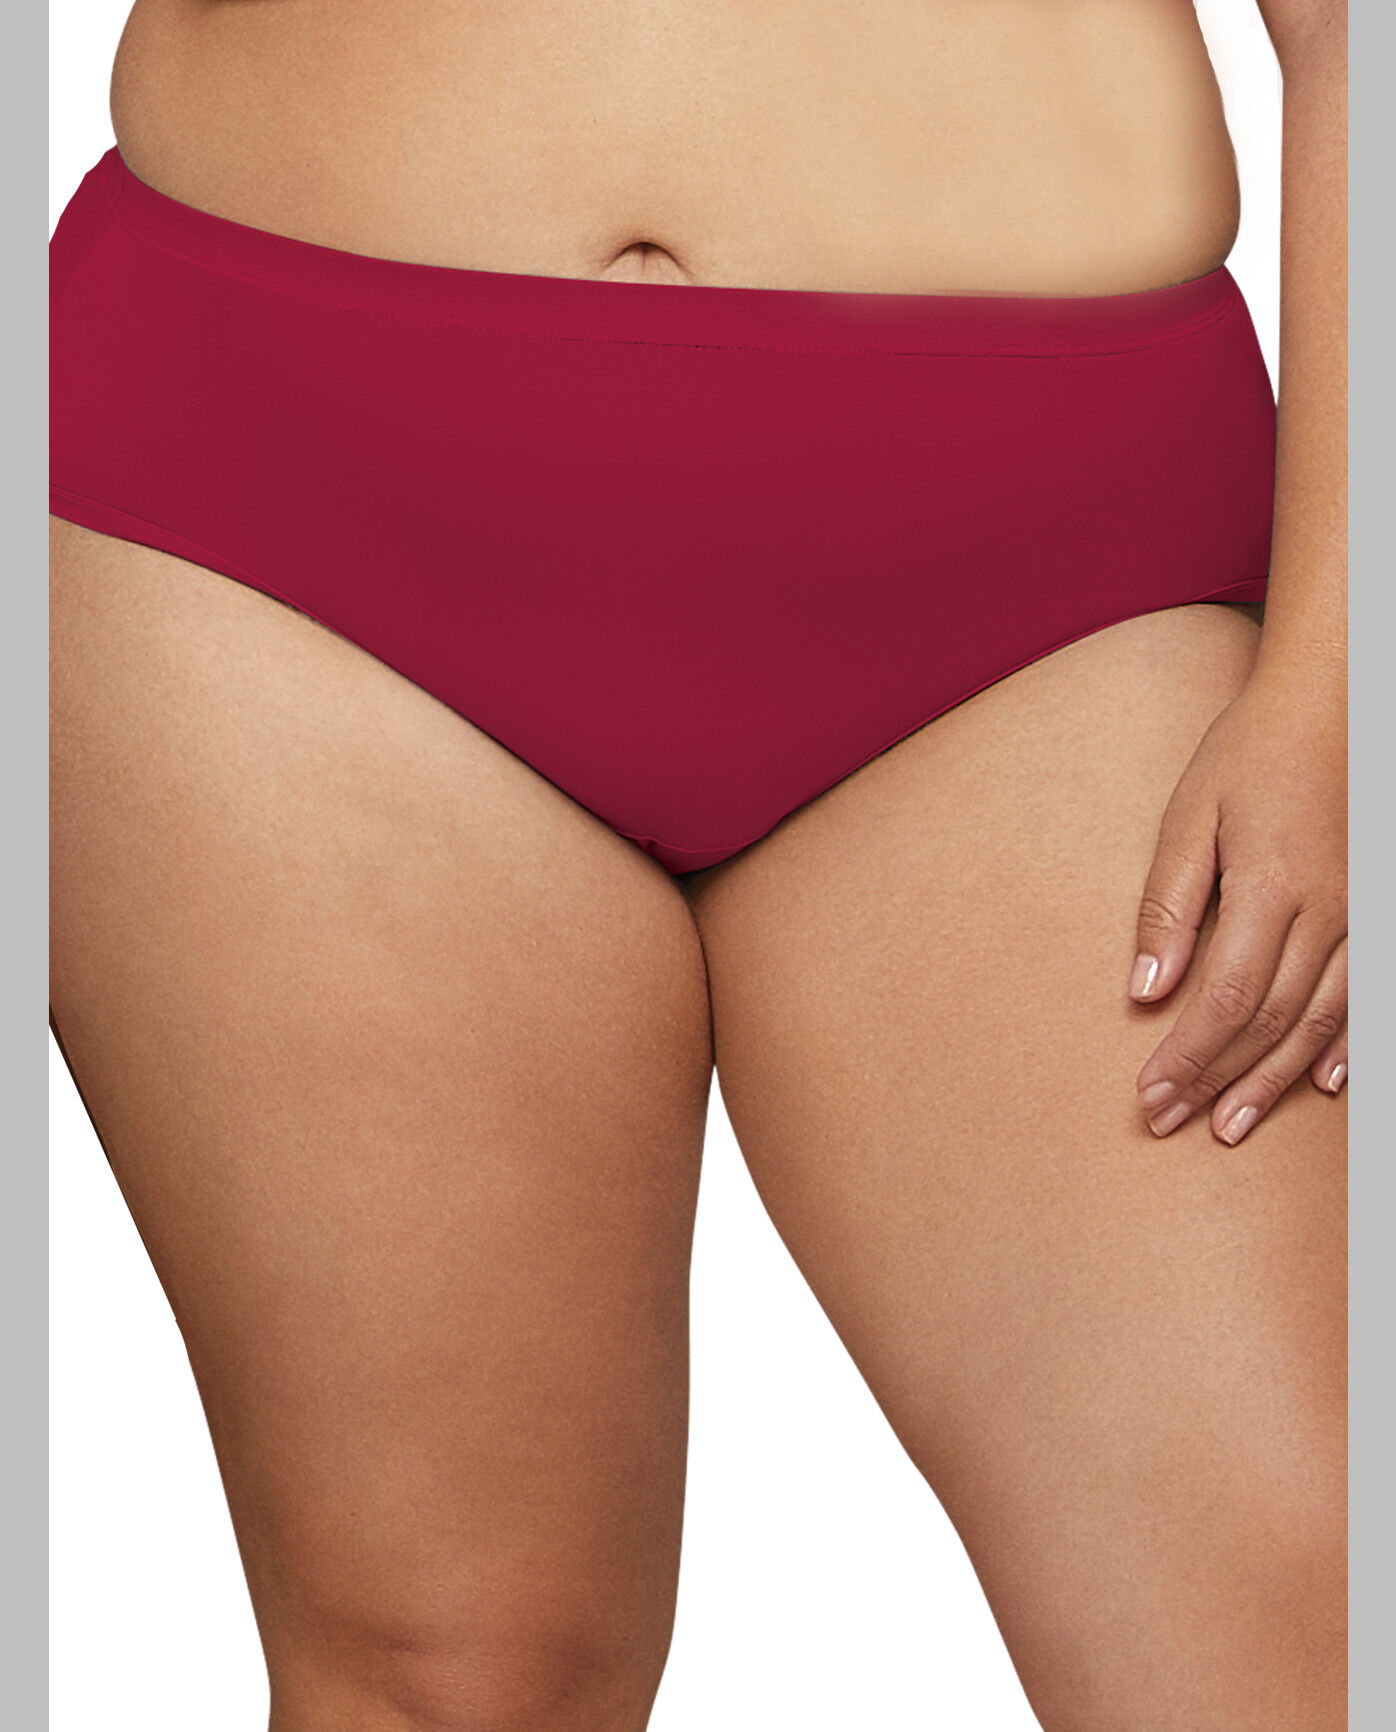 Regular & Plus Size Details about   Fruit of the Loom Women's Underwear Breathable Panties Col 